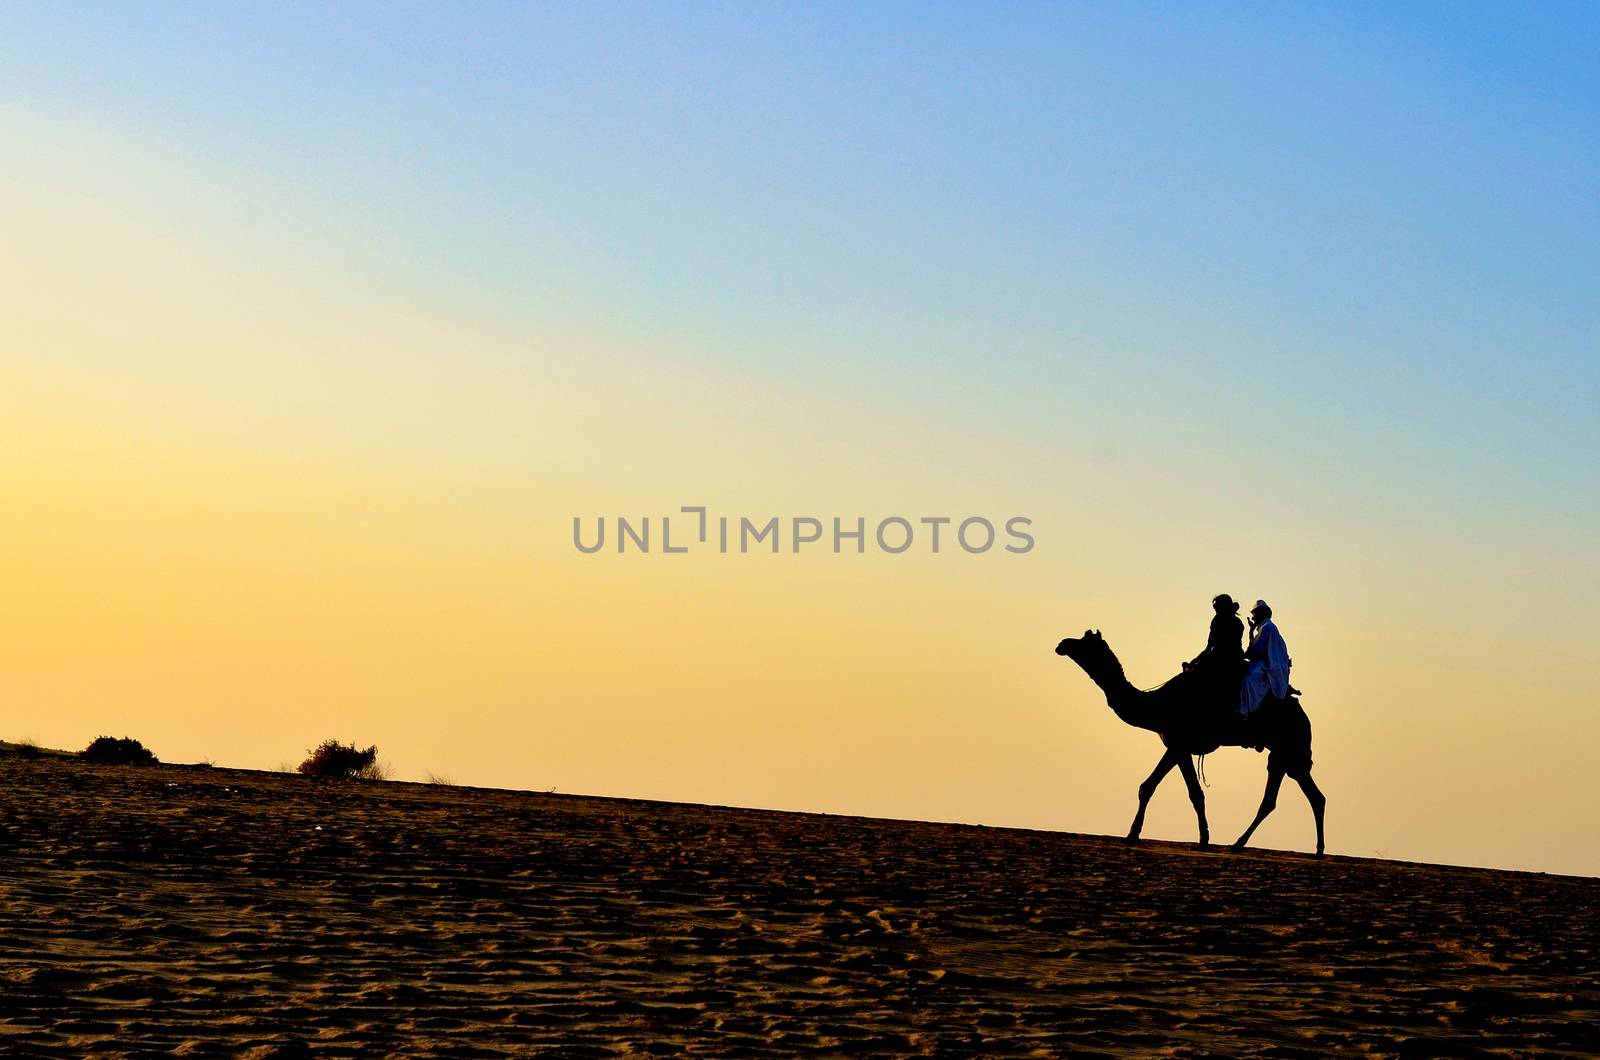 Silhouette of an Arabian camel carrying tourists in Sam Sand Dunes, Thar Desert, Jaisalmer, India. These sand dunes are amongst the most famous ones in Rajasthan.